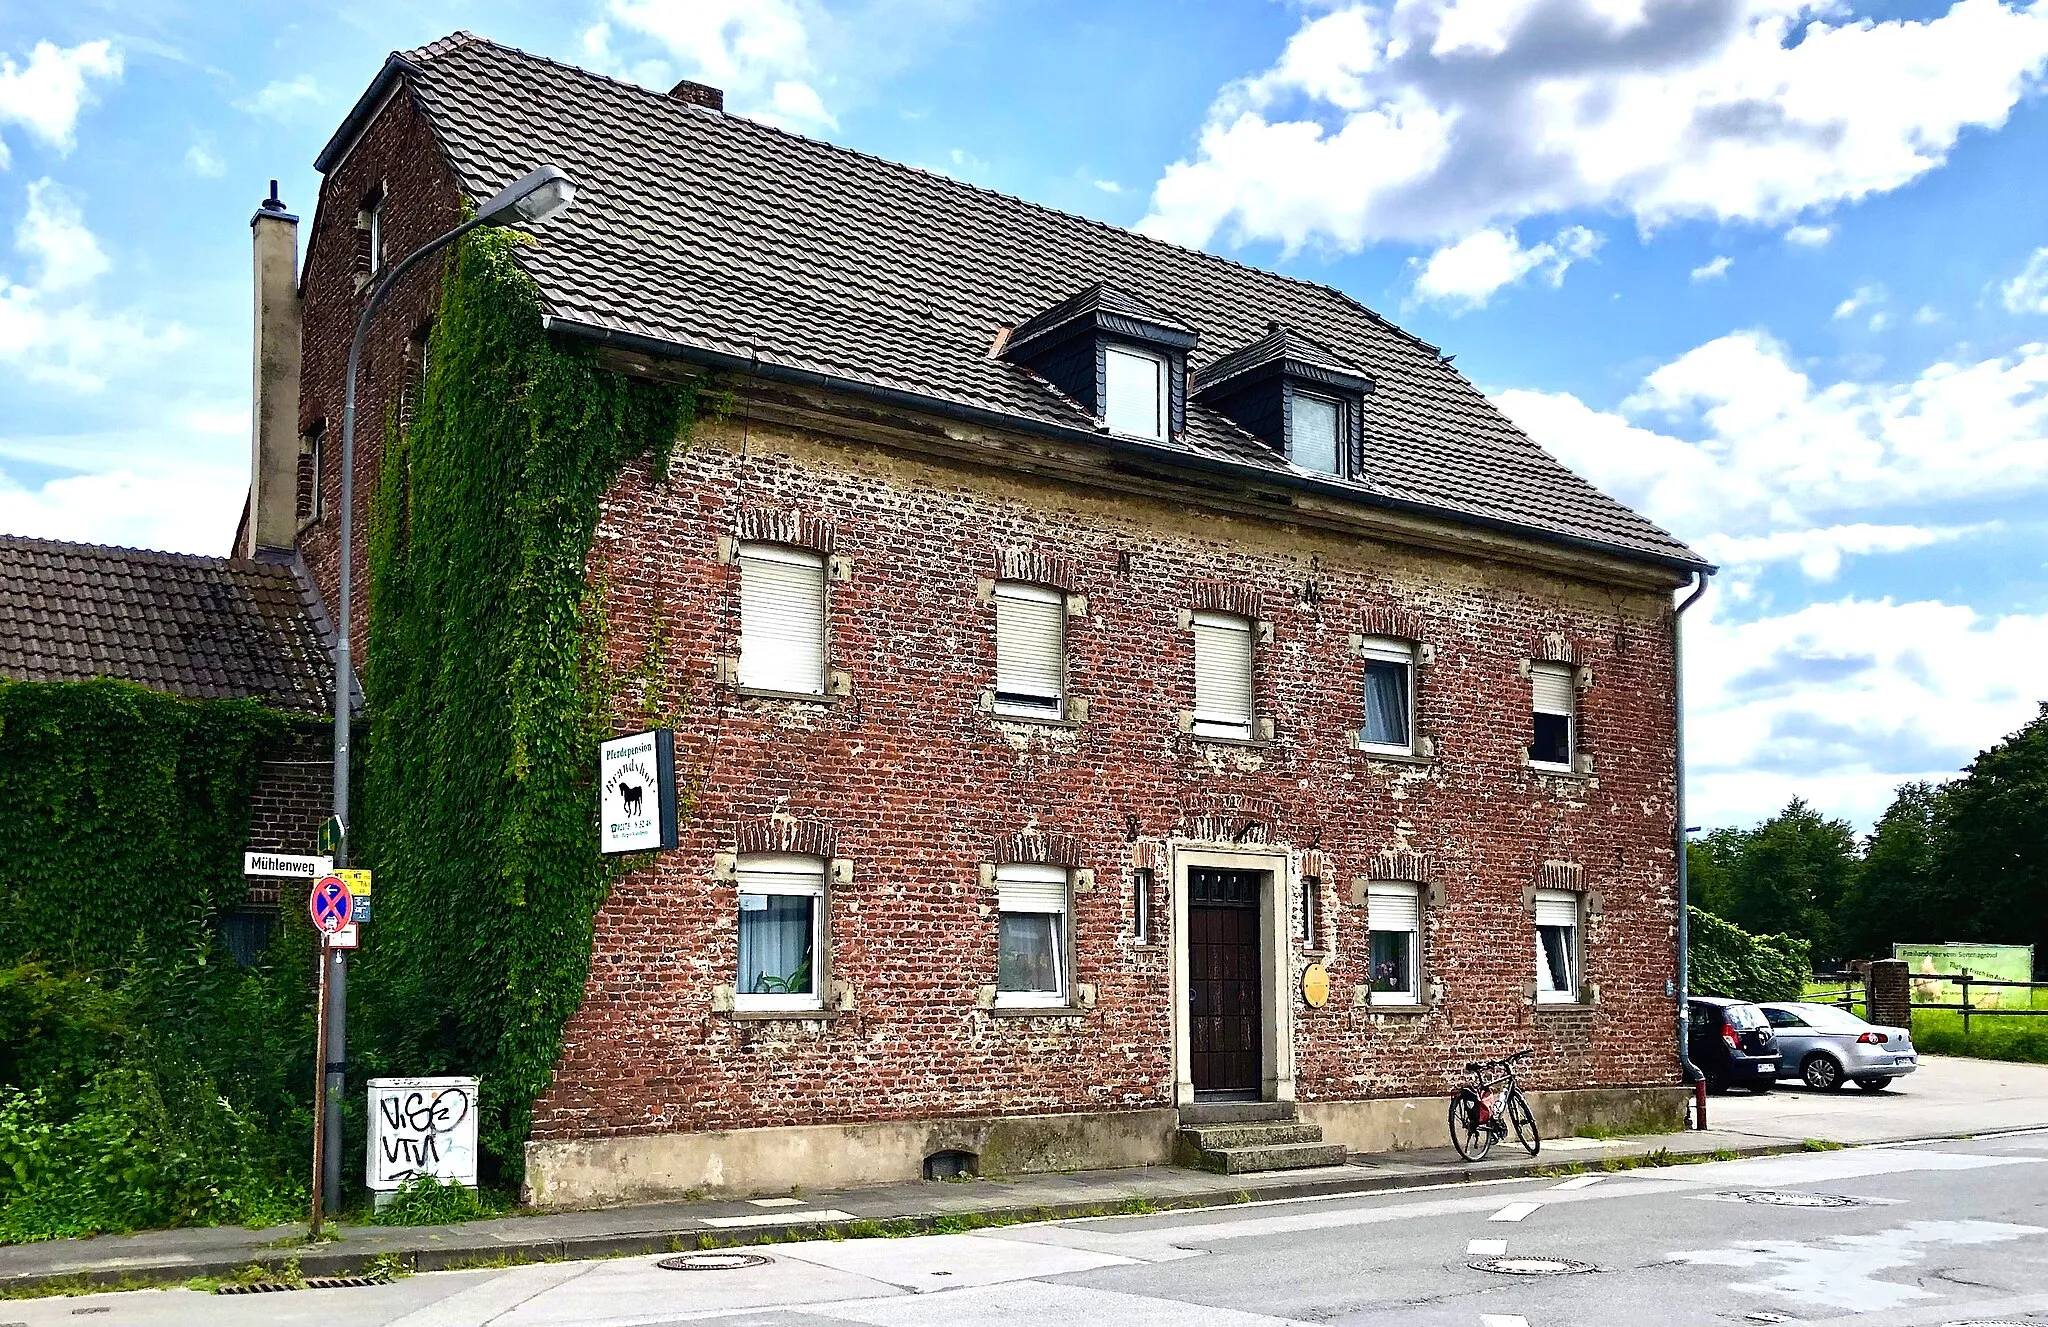 Photo showing: House 13 on Baumberger Strasse (Langenfeld-Rhineland). The local name of the house is Brandshof.